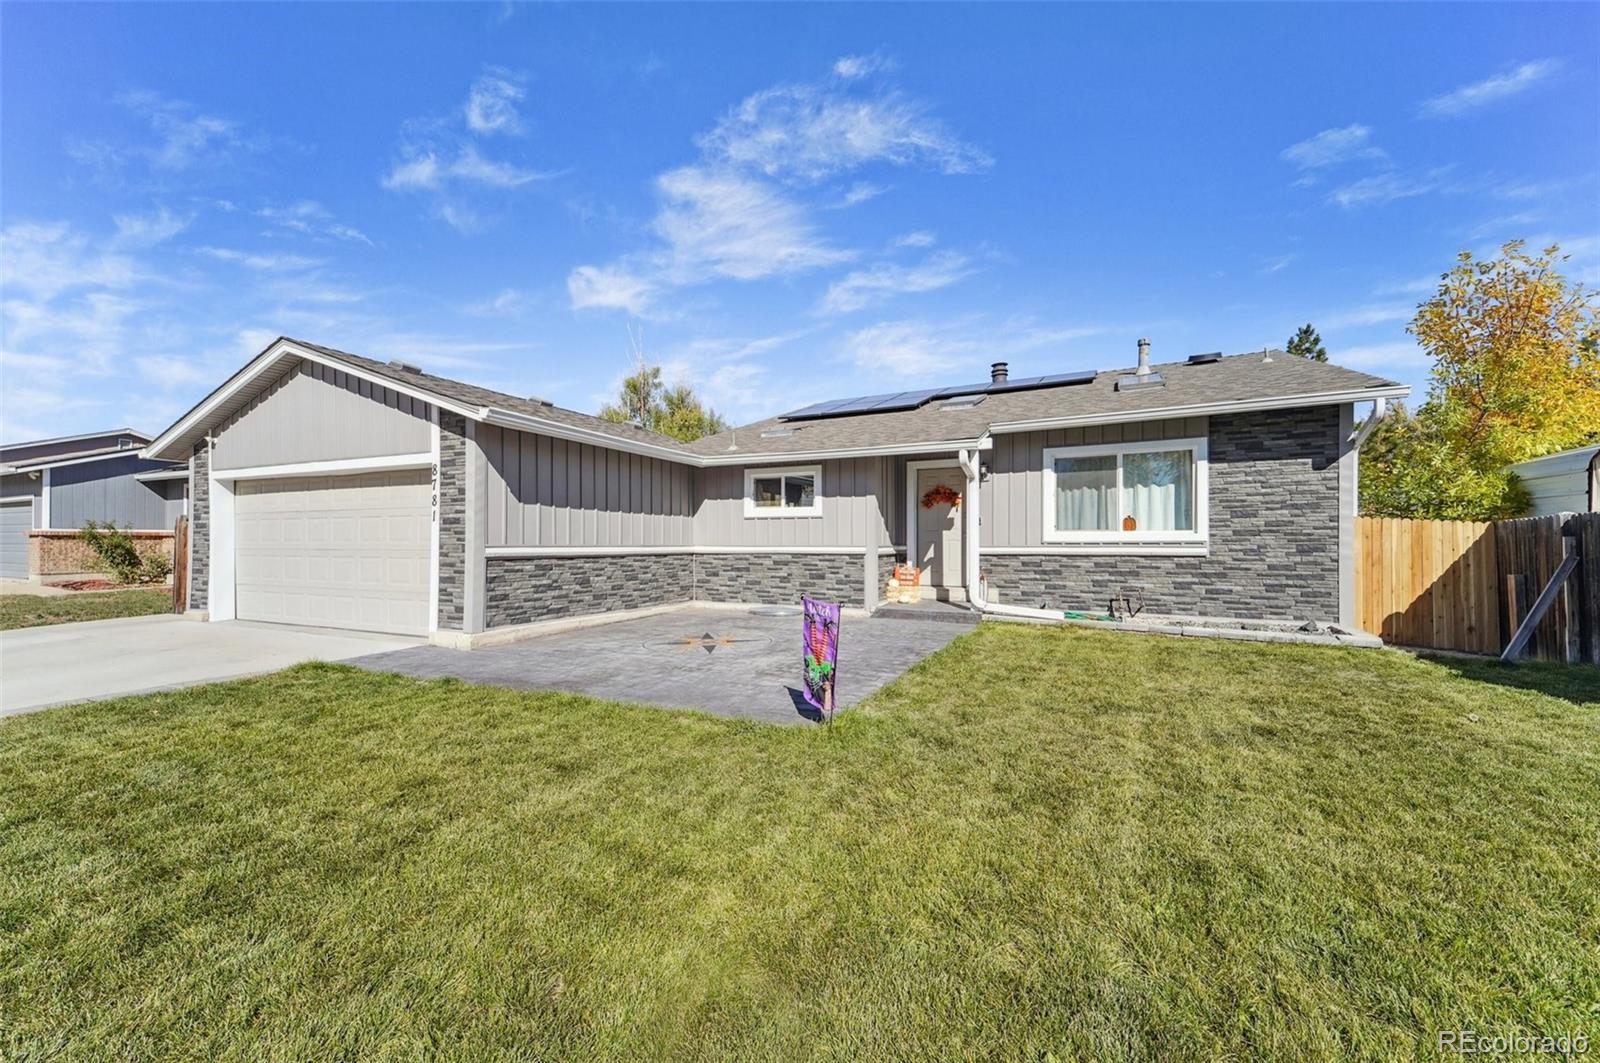 8781 w 86th drive, Arvada sold home. Closed on 2023-12-15 for $530,000.